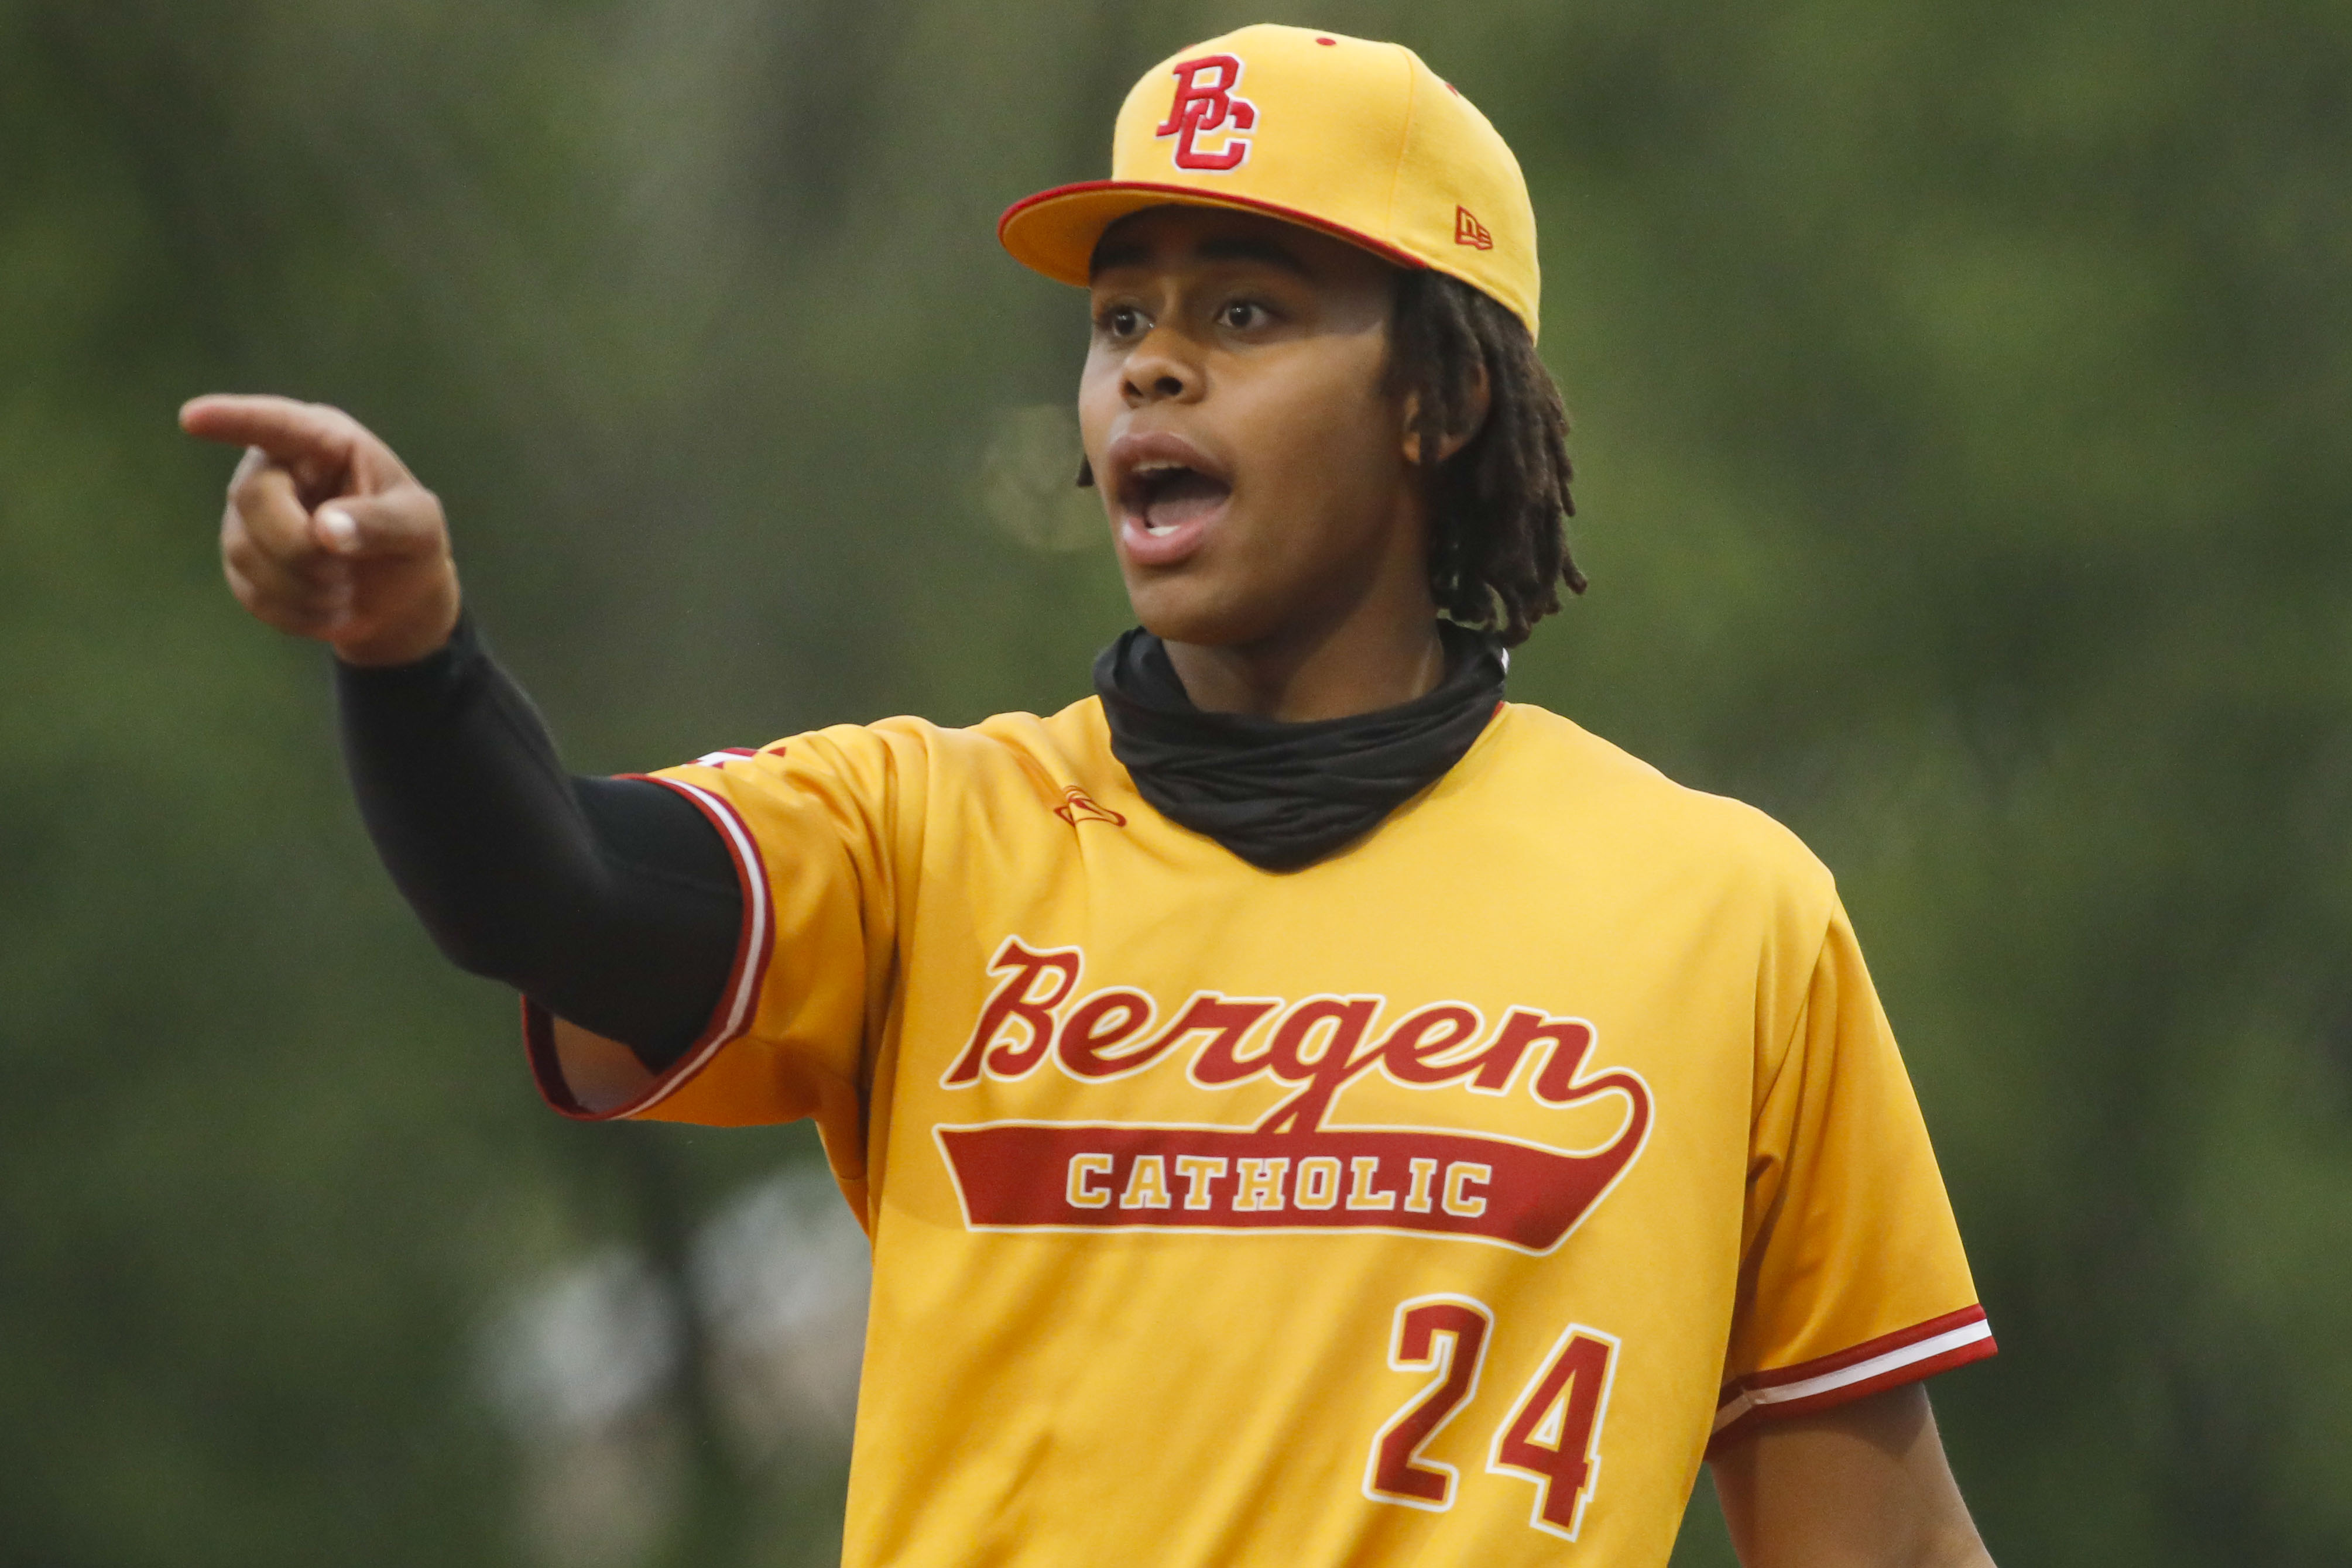 Carsten Sabathia (28) of Bergen Catholic High School in Alpine, New Jersey  during the Perfect Game National Showcase on July 17, 2021 at Tropicana  Field in St. Petersburg, Florida. (Mike Janes/Four Seam